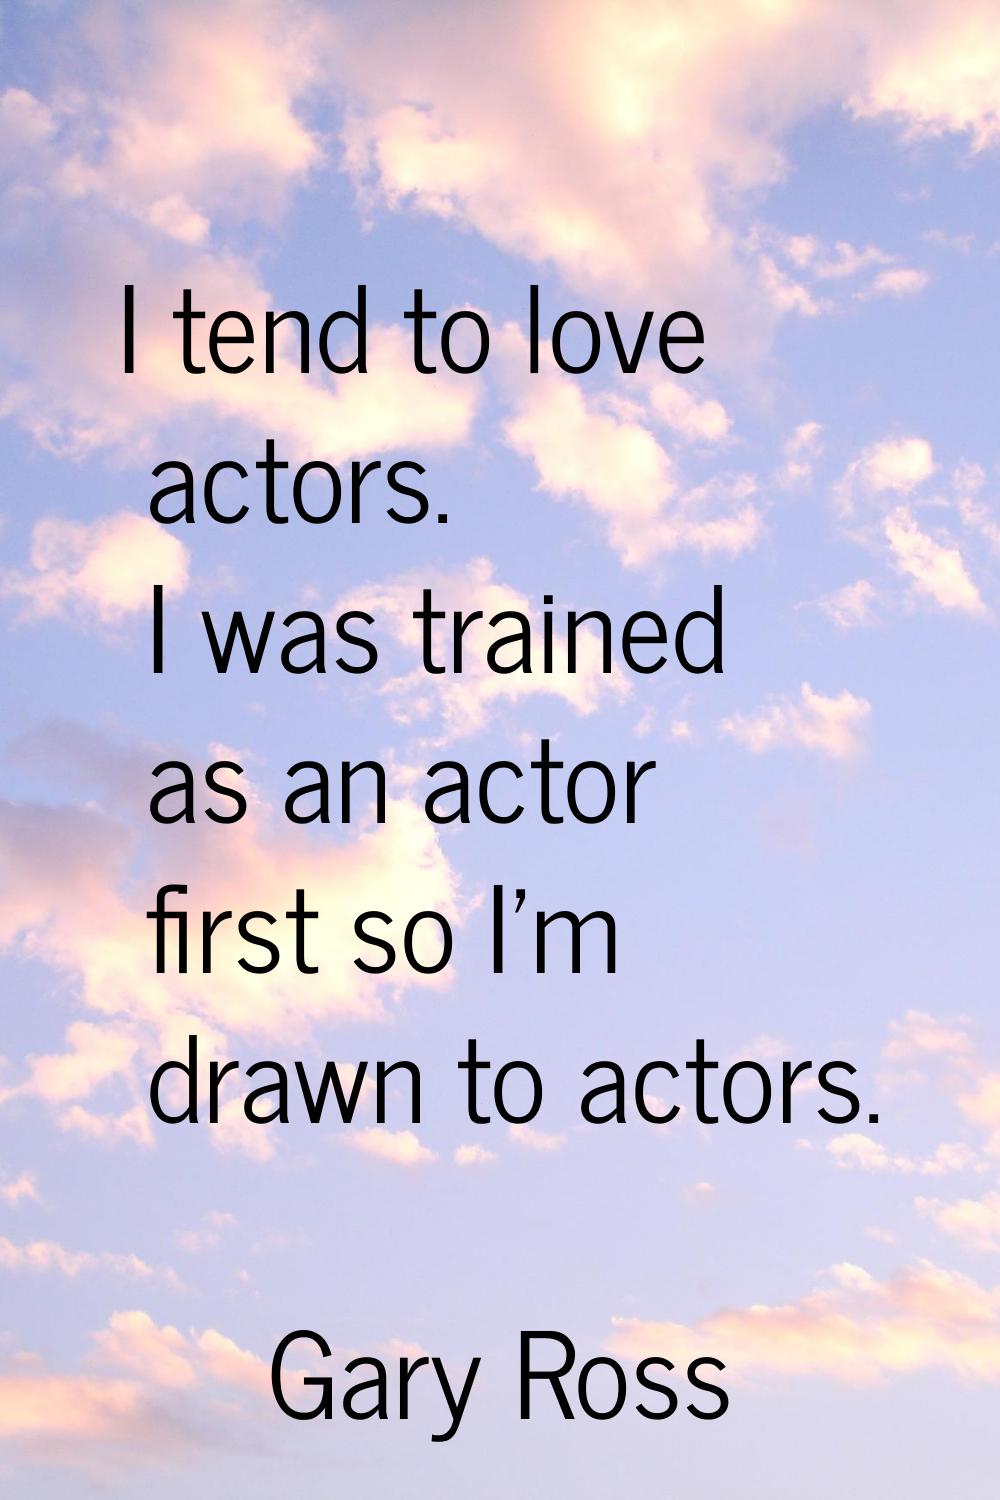 I tend to love actors. I was trained as an actor first so I'm drawn to actors.